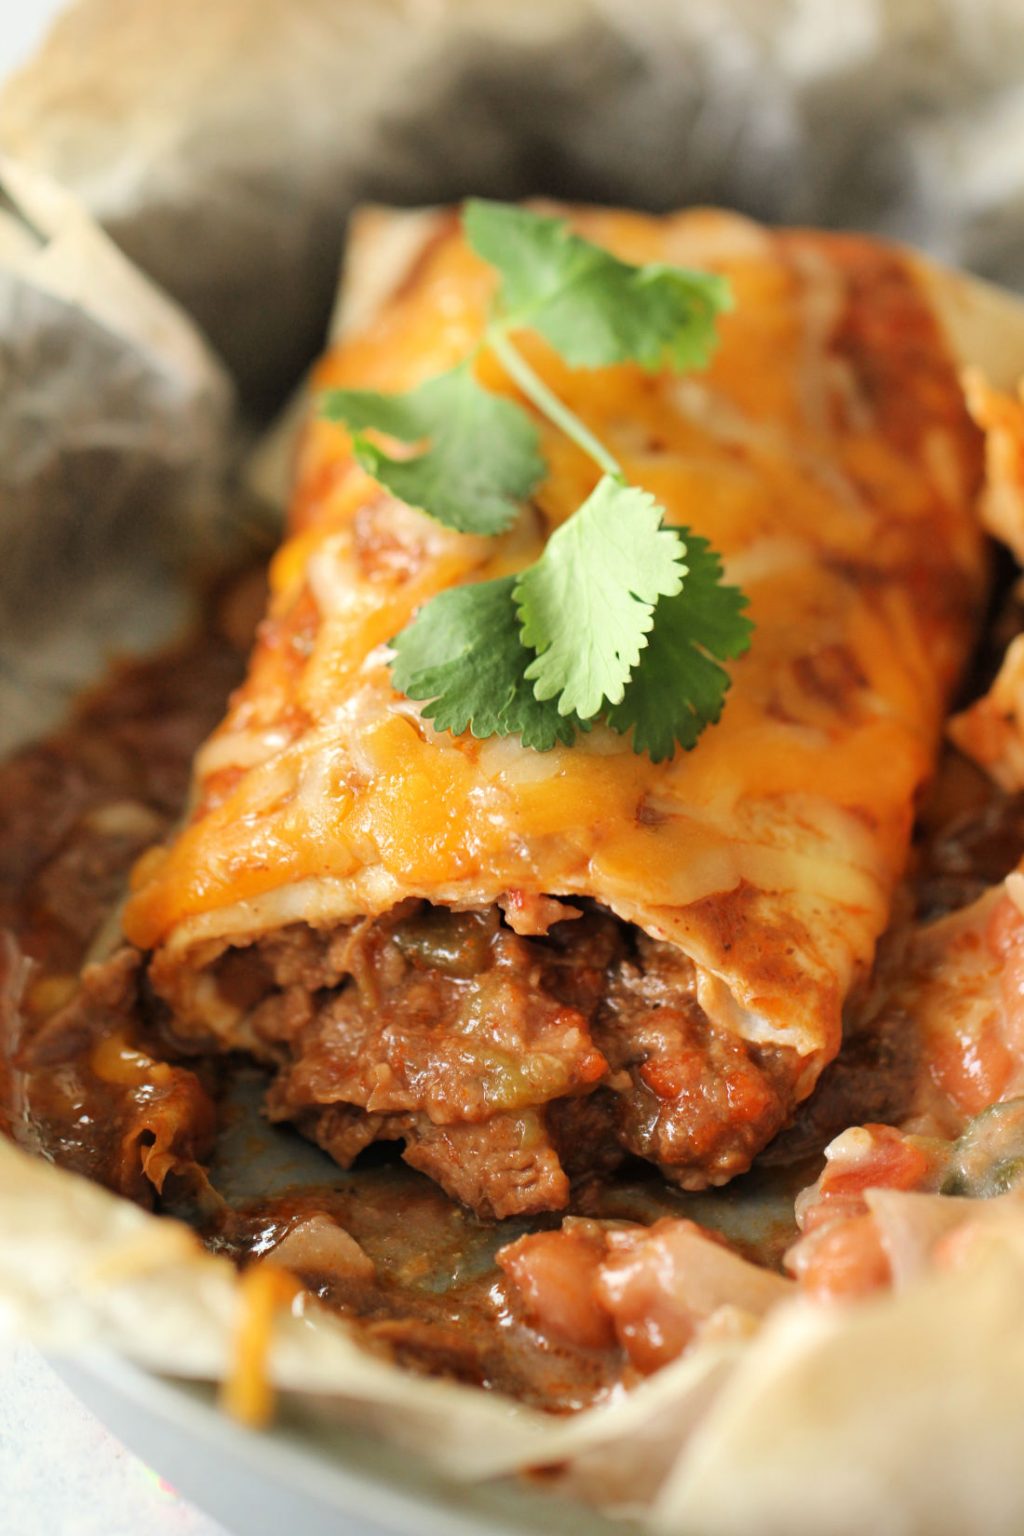 Chile-Colorado-Beef-Burrito-in-the-Slow-Cooker-1024x1536.jpg?profile=RESIZE_710x